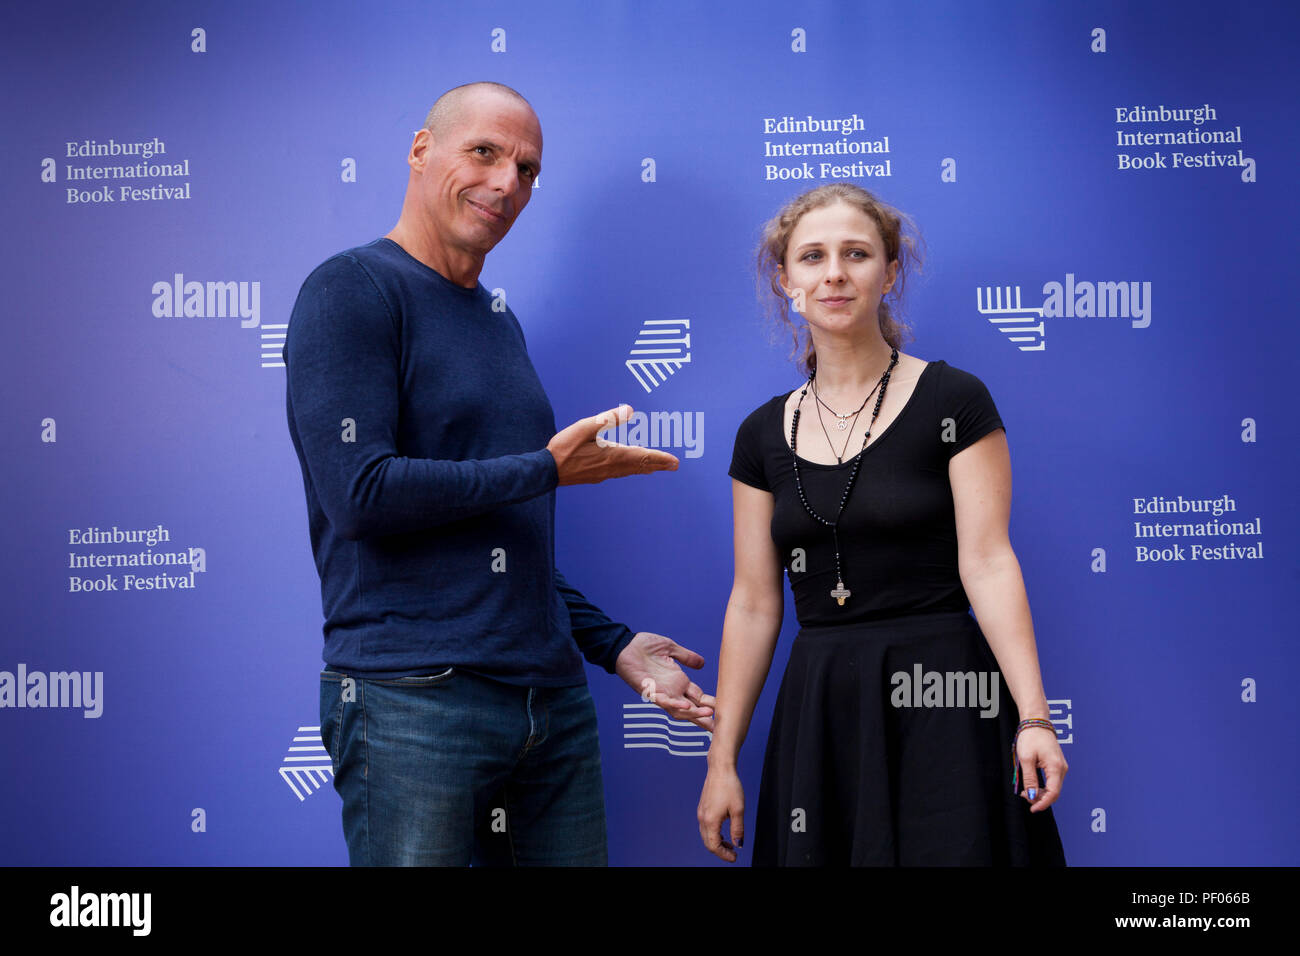 Edinburgh, UK. 18th August, 2018. Yanis Varoufakis (left) & Maria Alyokhina (Pussy Riot). Maria Vladimirovna 'Masha' Alyokhina is a Russian political activist. She is a member of the anti-Putinist punk rock group Pussy Riot. Yanis Varoufakis, the Greek economist, academic and politician, who served as the Greek Minister of Finance from January to July 2015. Pictured at the Edinburgh International Book Festival. Edinburgh, Scotland.  Picture by Gary Doak / Alamy Live News Stock Photo